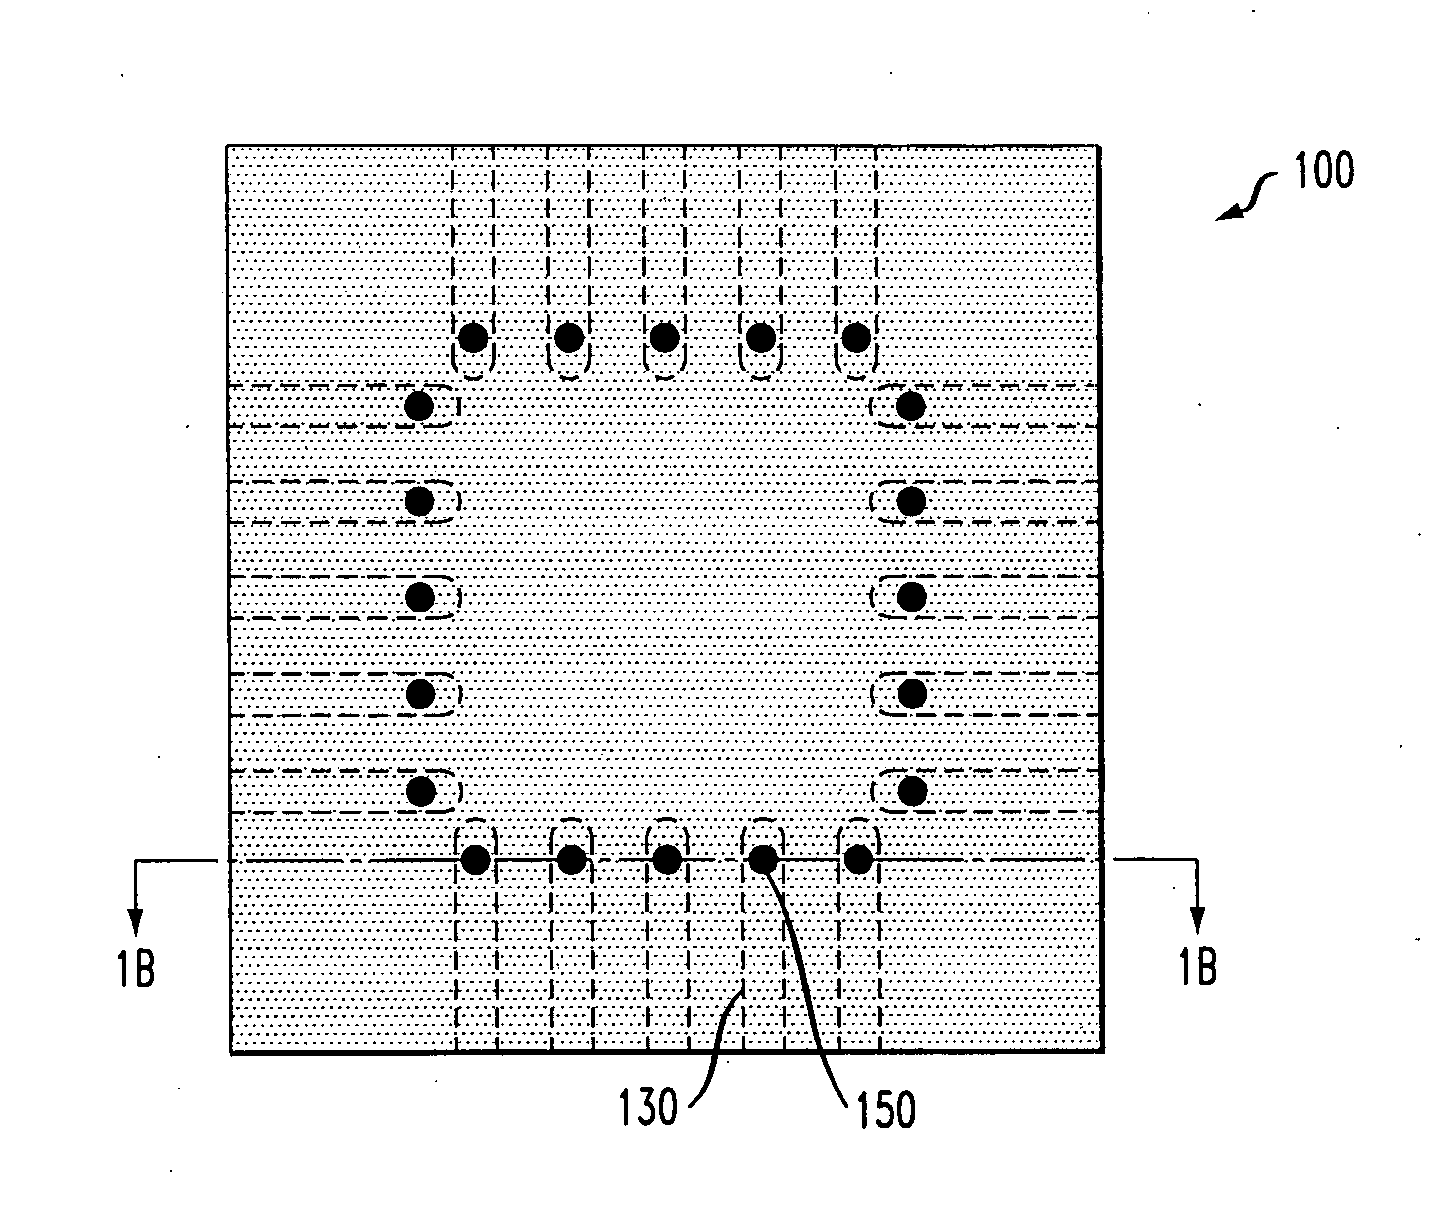 Flexible circuit substrate for flip-chip-on-flex applications